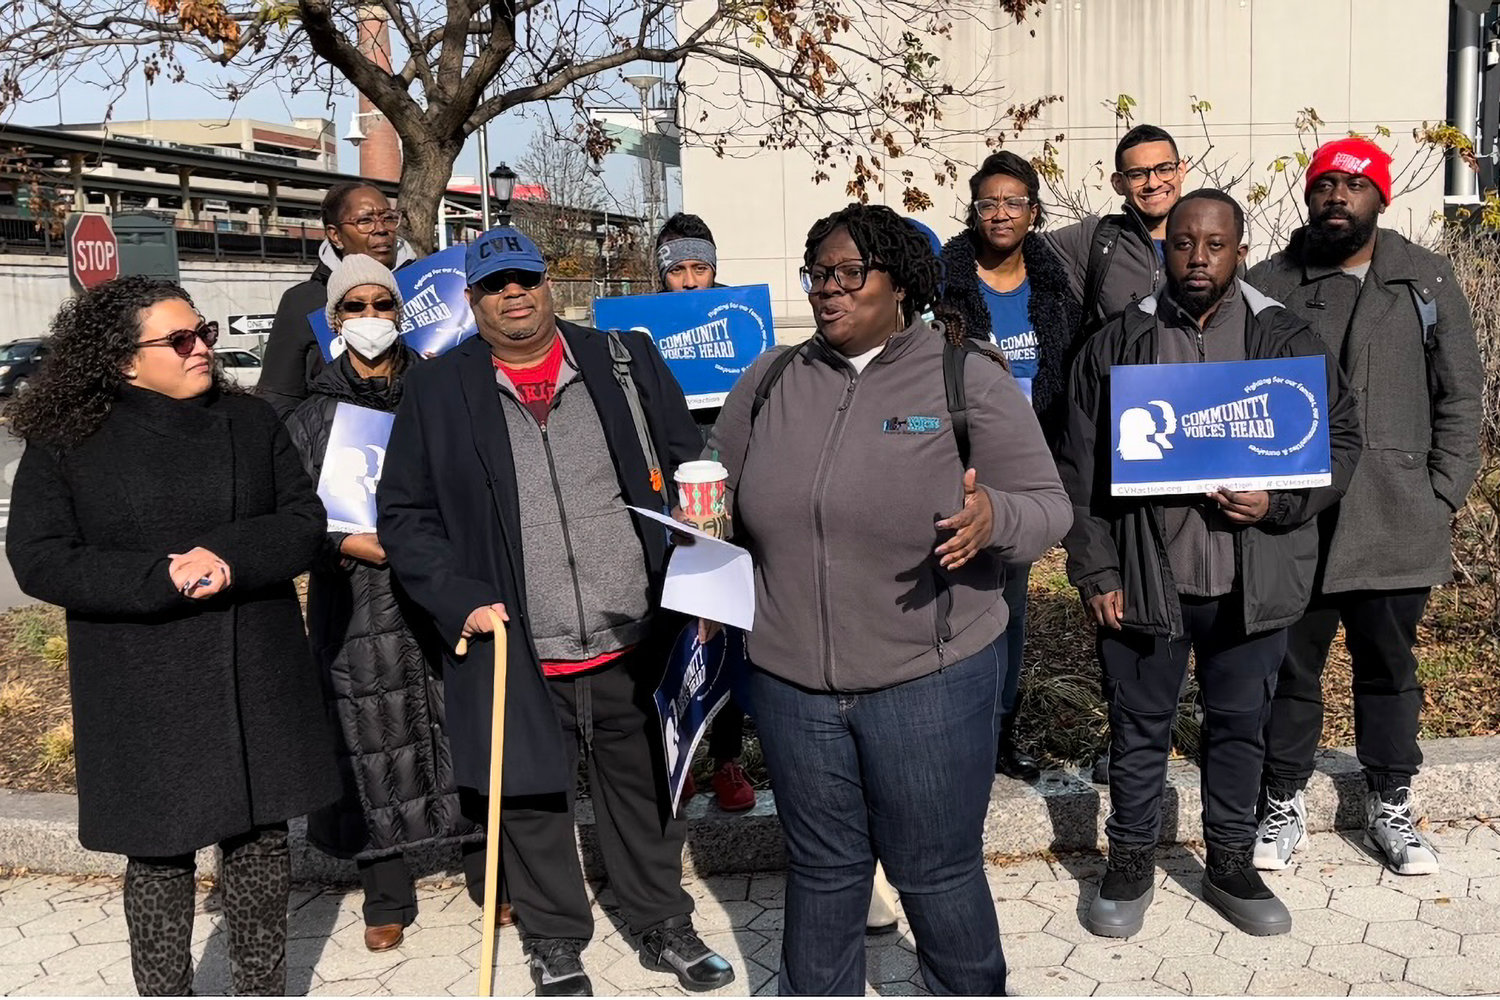 In preparation for the new legislative session, IONY held a rally in Yonkers on Dec. 5 to gain support on its slate of bills that would, in the group’s eyes, create a fairer tax system.